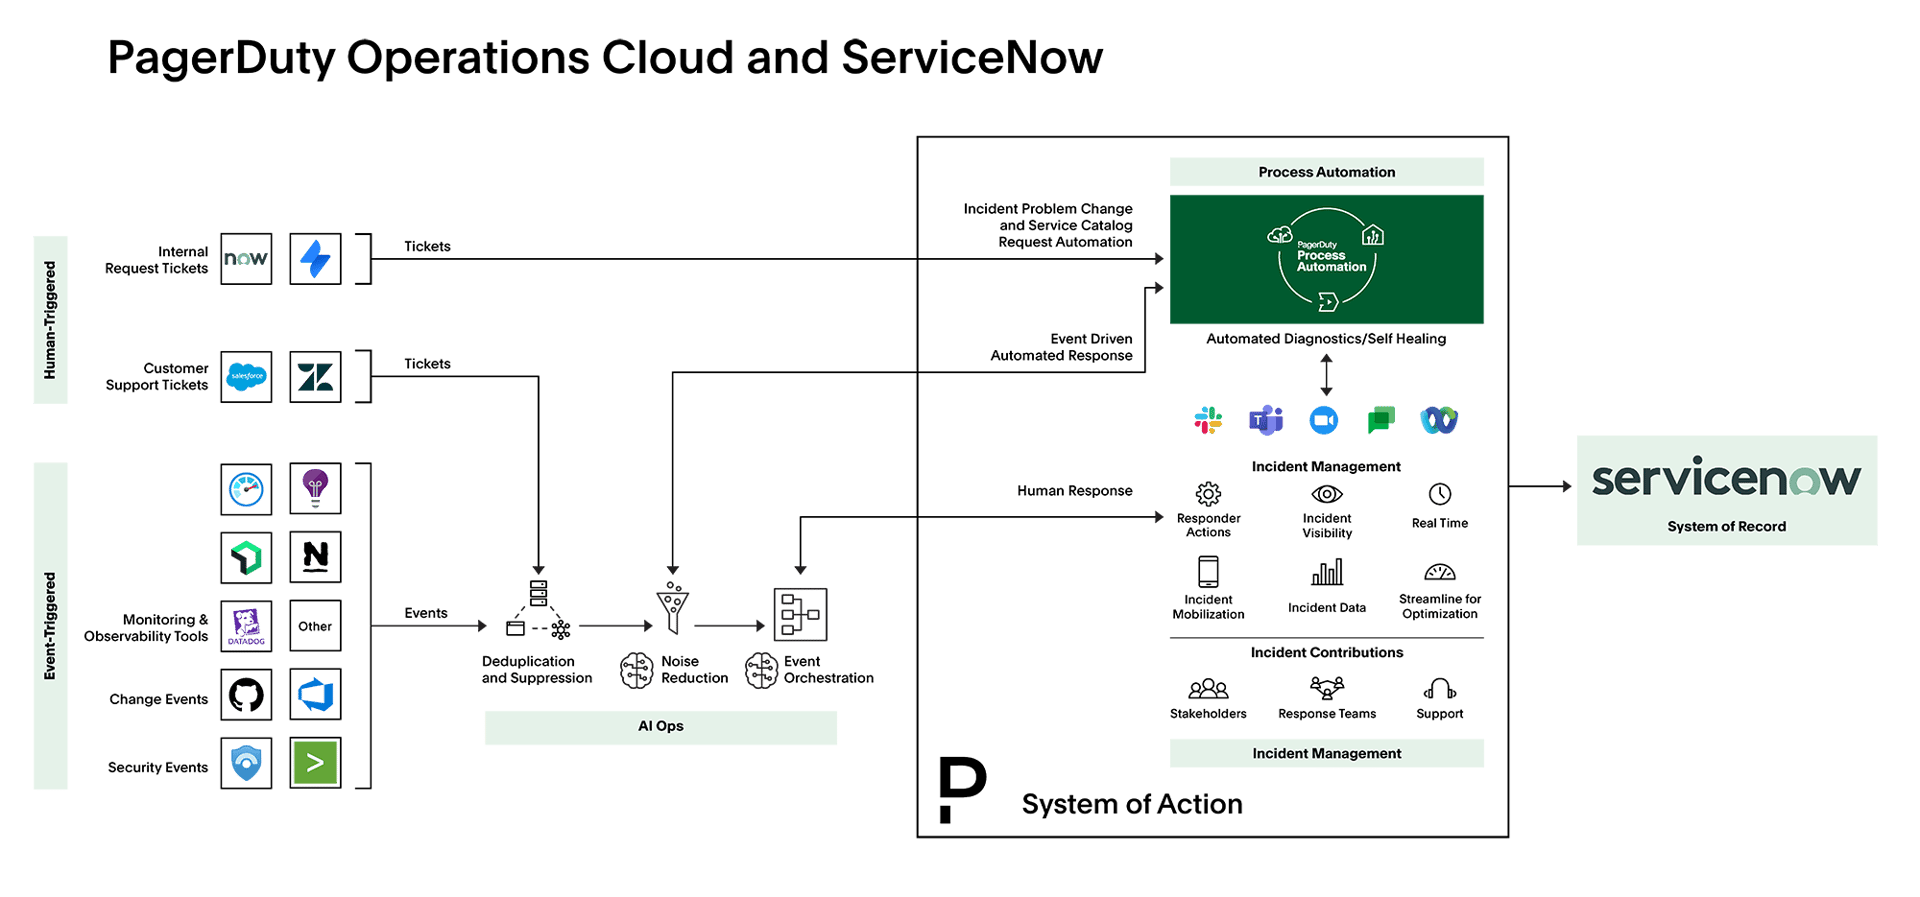 Pagerduty Operations cloud and ServiceNow (1)